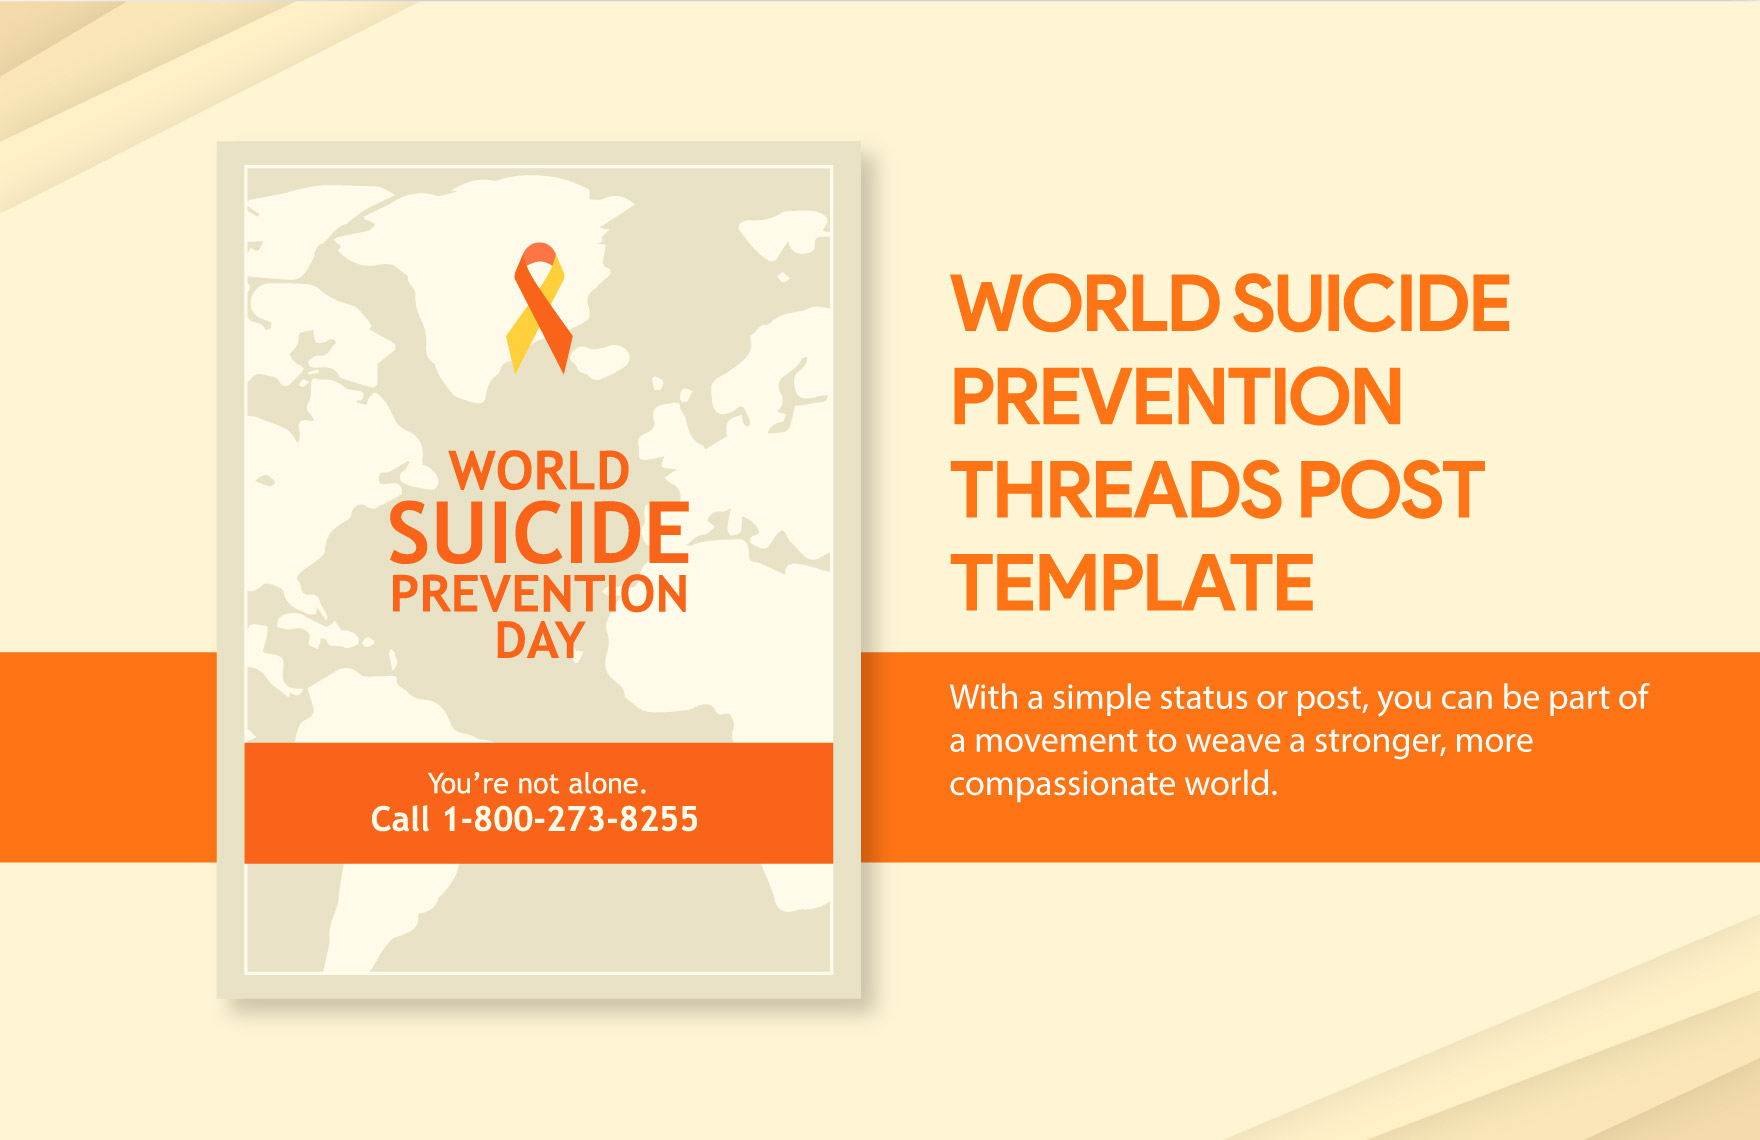 Free World Suicide Prevention Day Threads Post Template in Illustrator, PSD, PNG